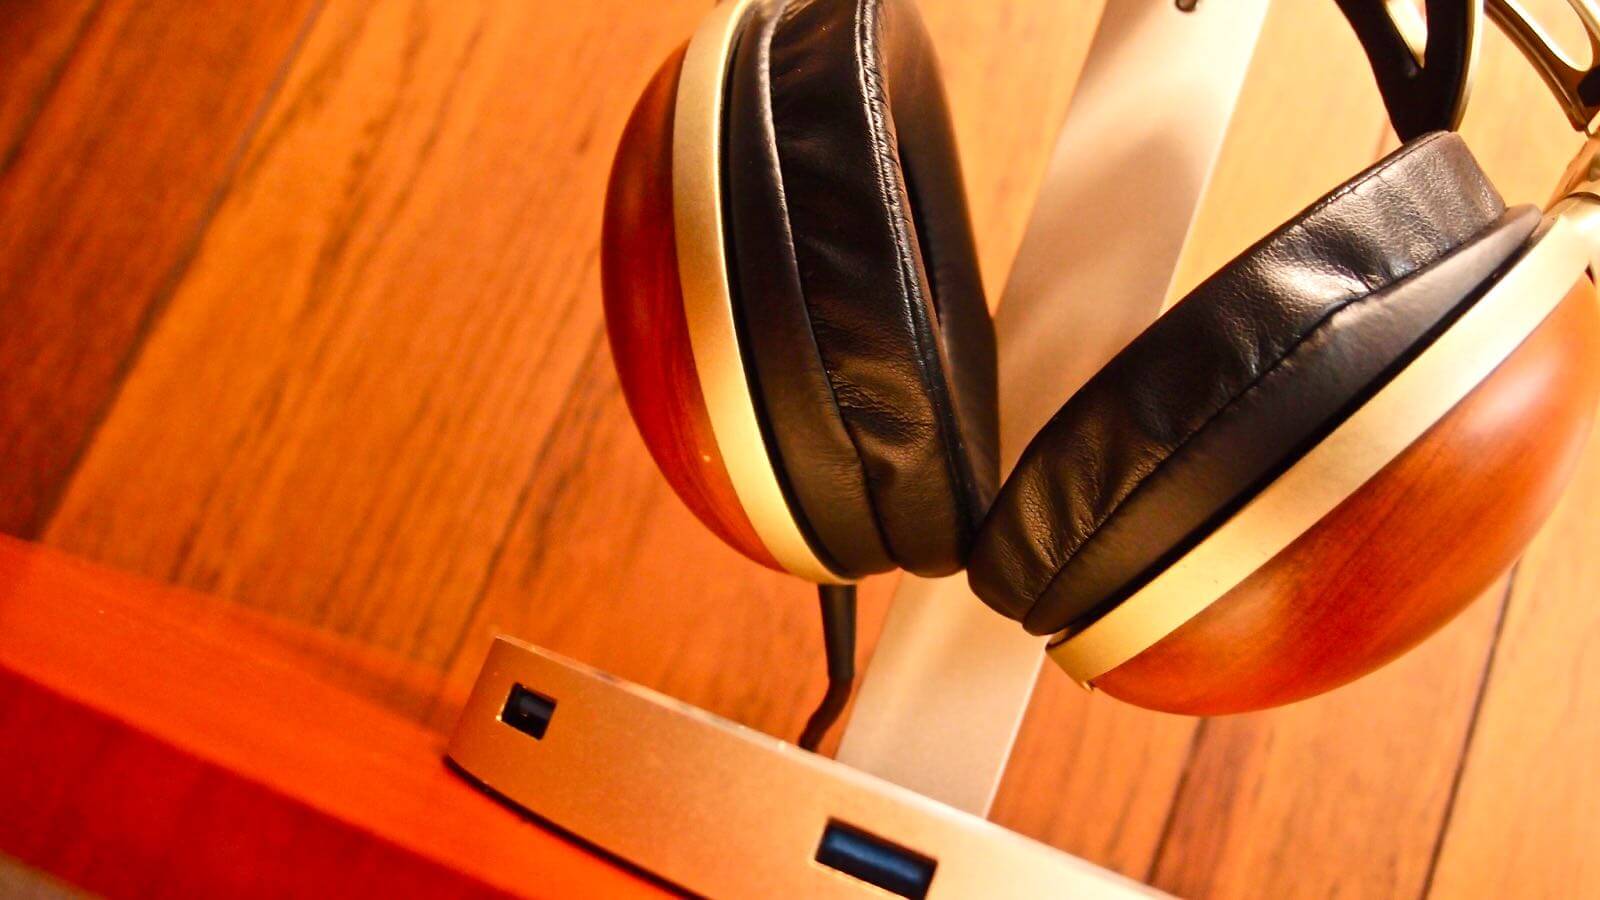 0160 Satechi s Headphone Stand Review 20